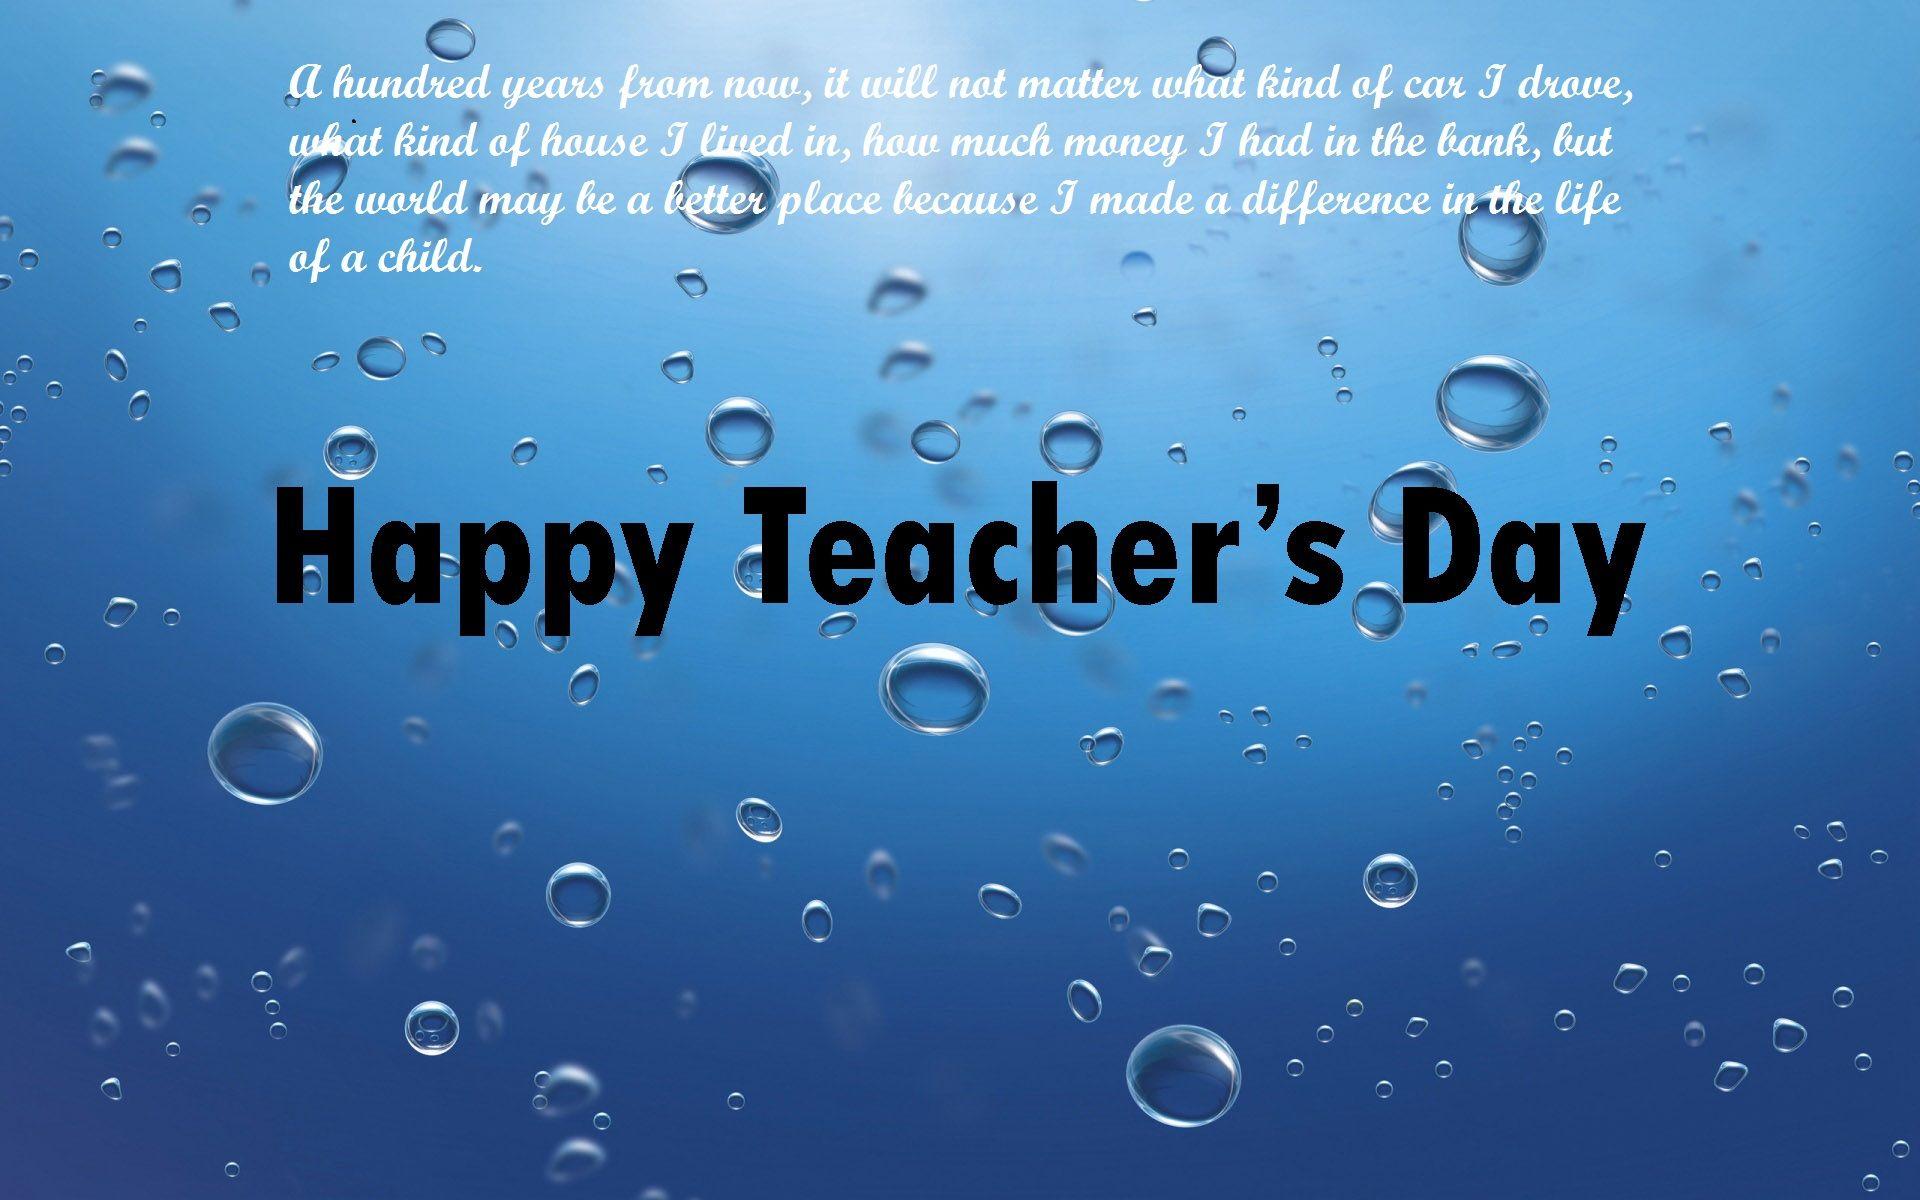 2019} Happy Teachers Day HD Image, Wallpaper, Pics, and Photo (Free Download)